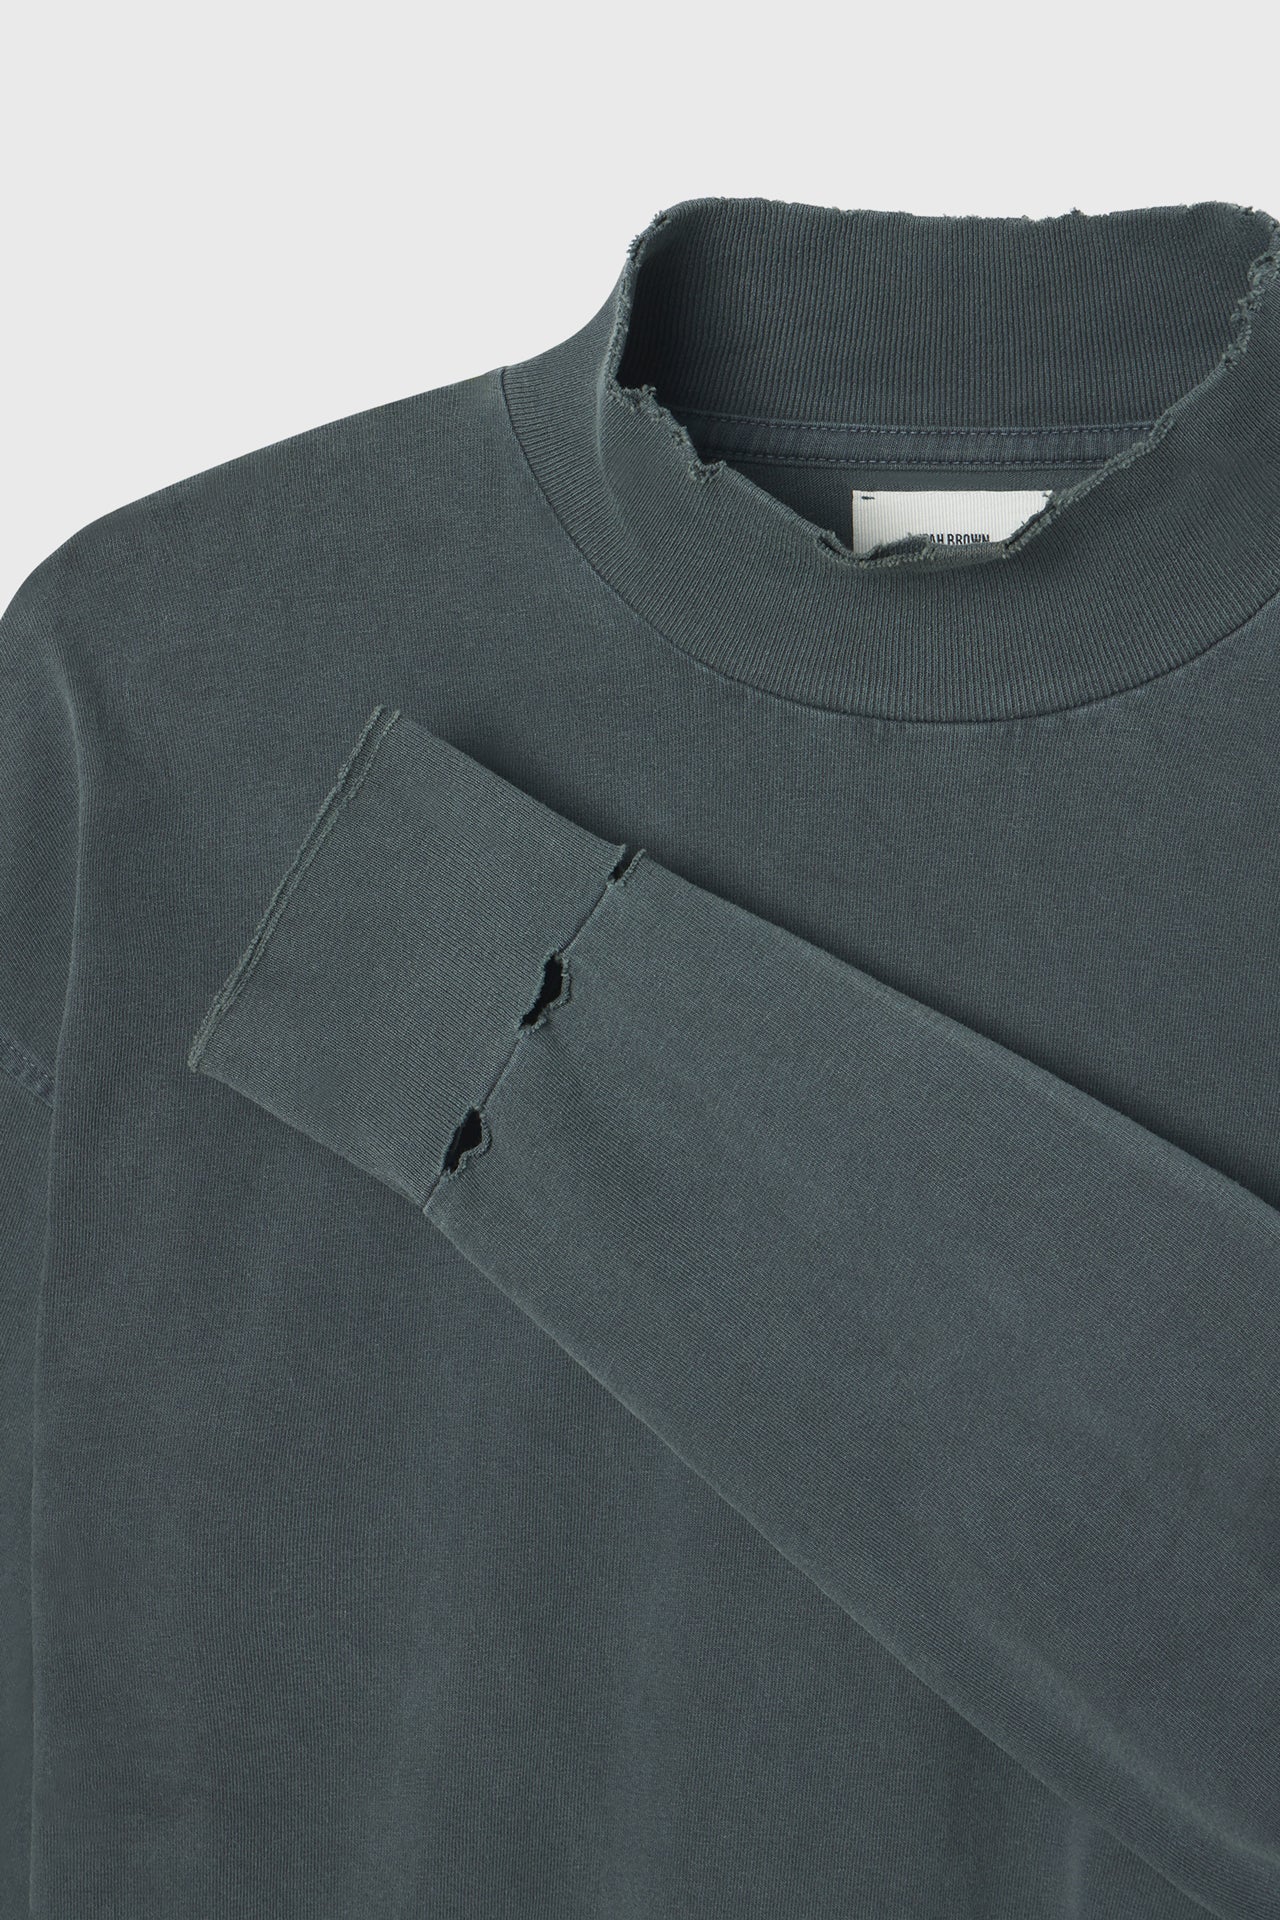 Close up detail front flat lay view the relaxed fit evergreen cotton Vintage Turtleneck Long Sleeve Top with thumbholes and torn seams at the cuff